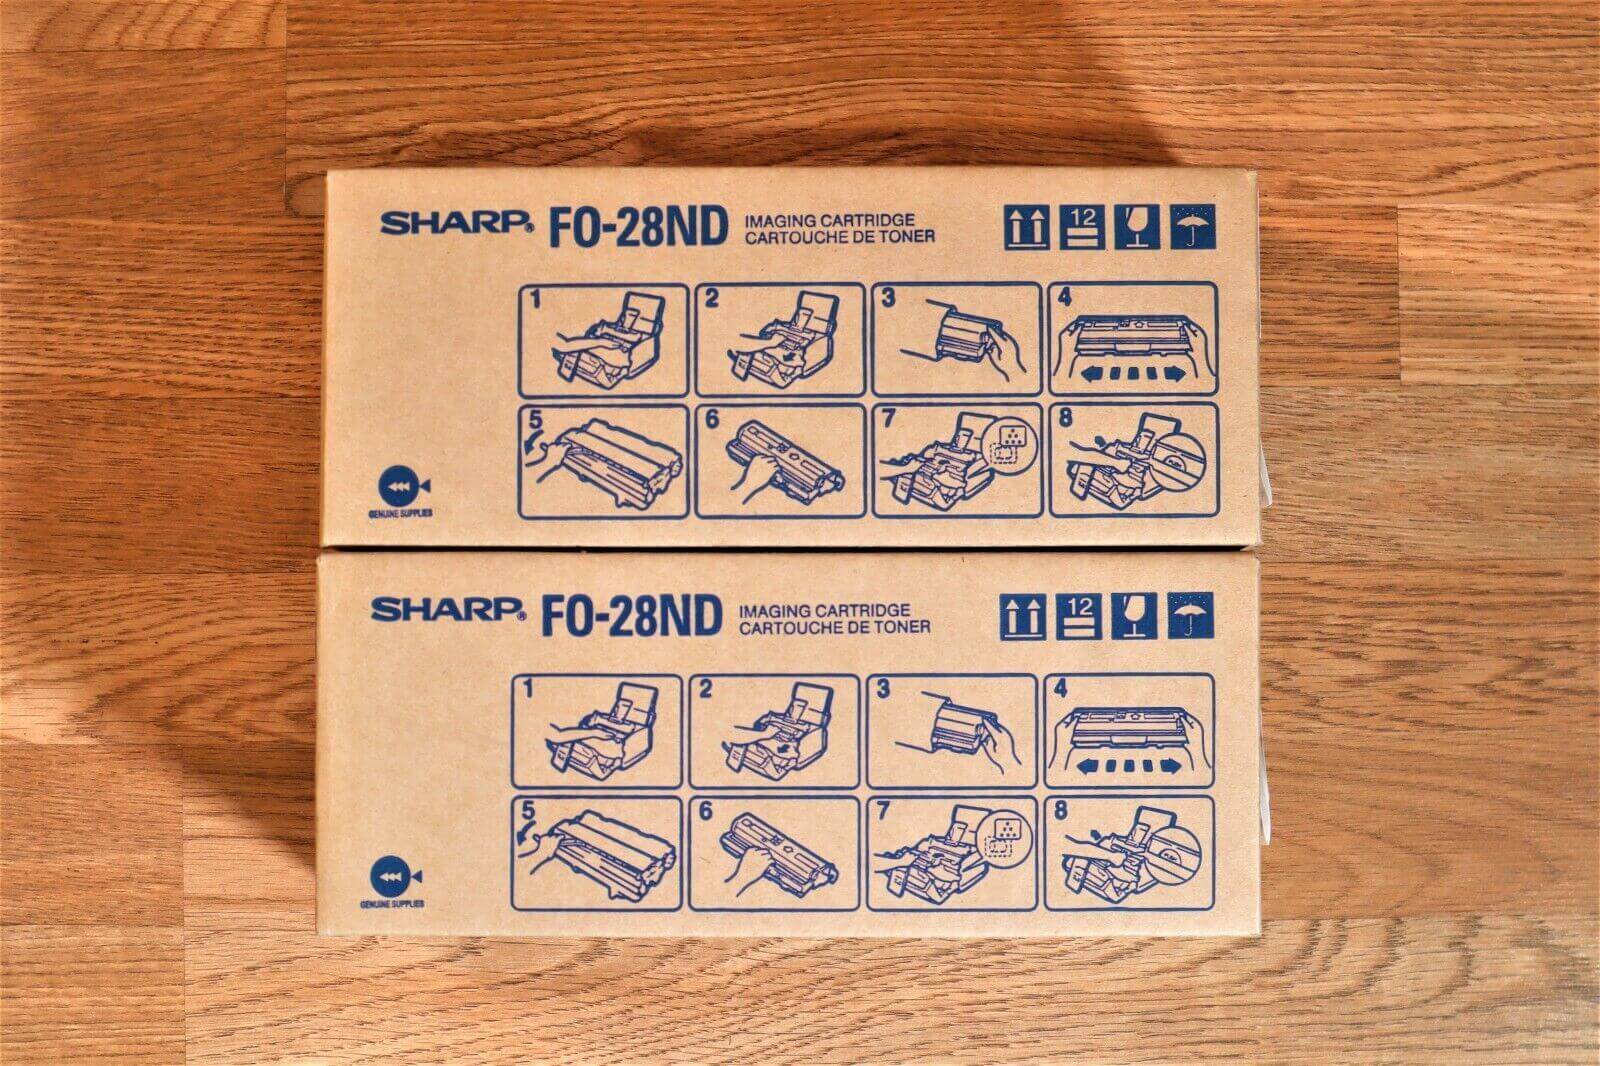 Lot Of 2 Sharp F0-28ND Black Imaging Toner Cartridges FO-2800 / FO-2850 Same Day - copier-clearance-center